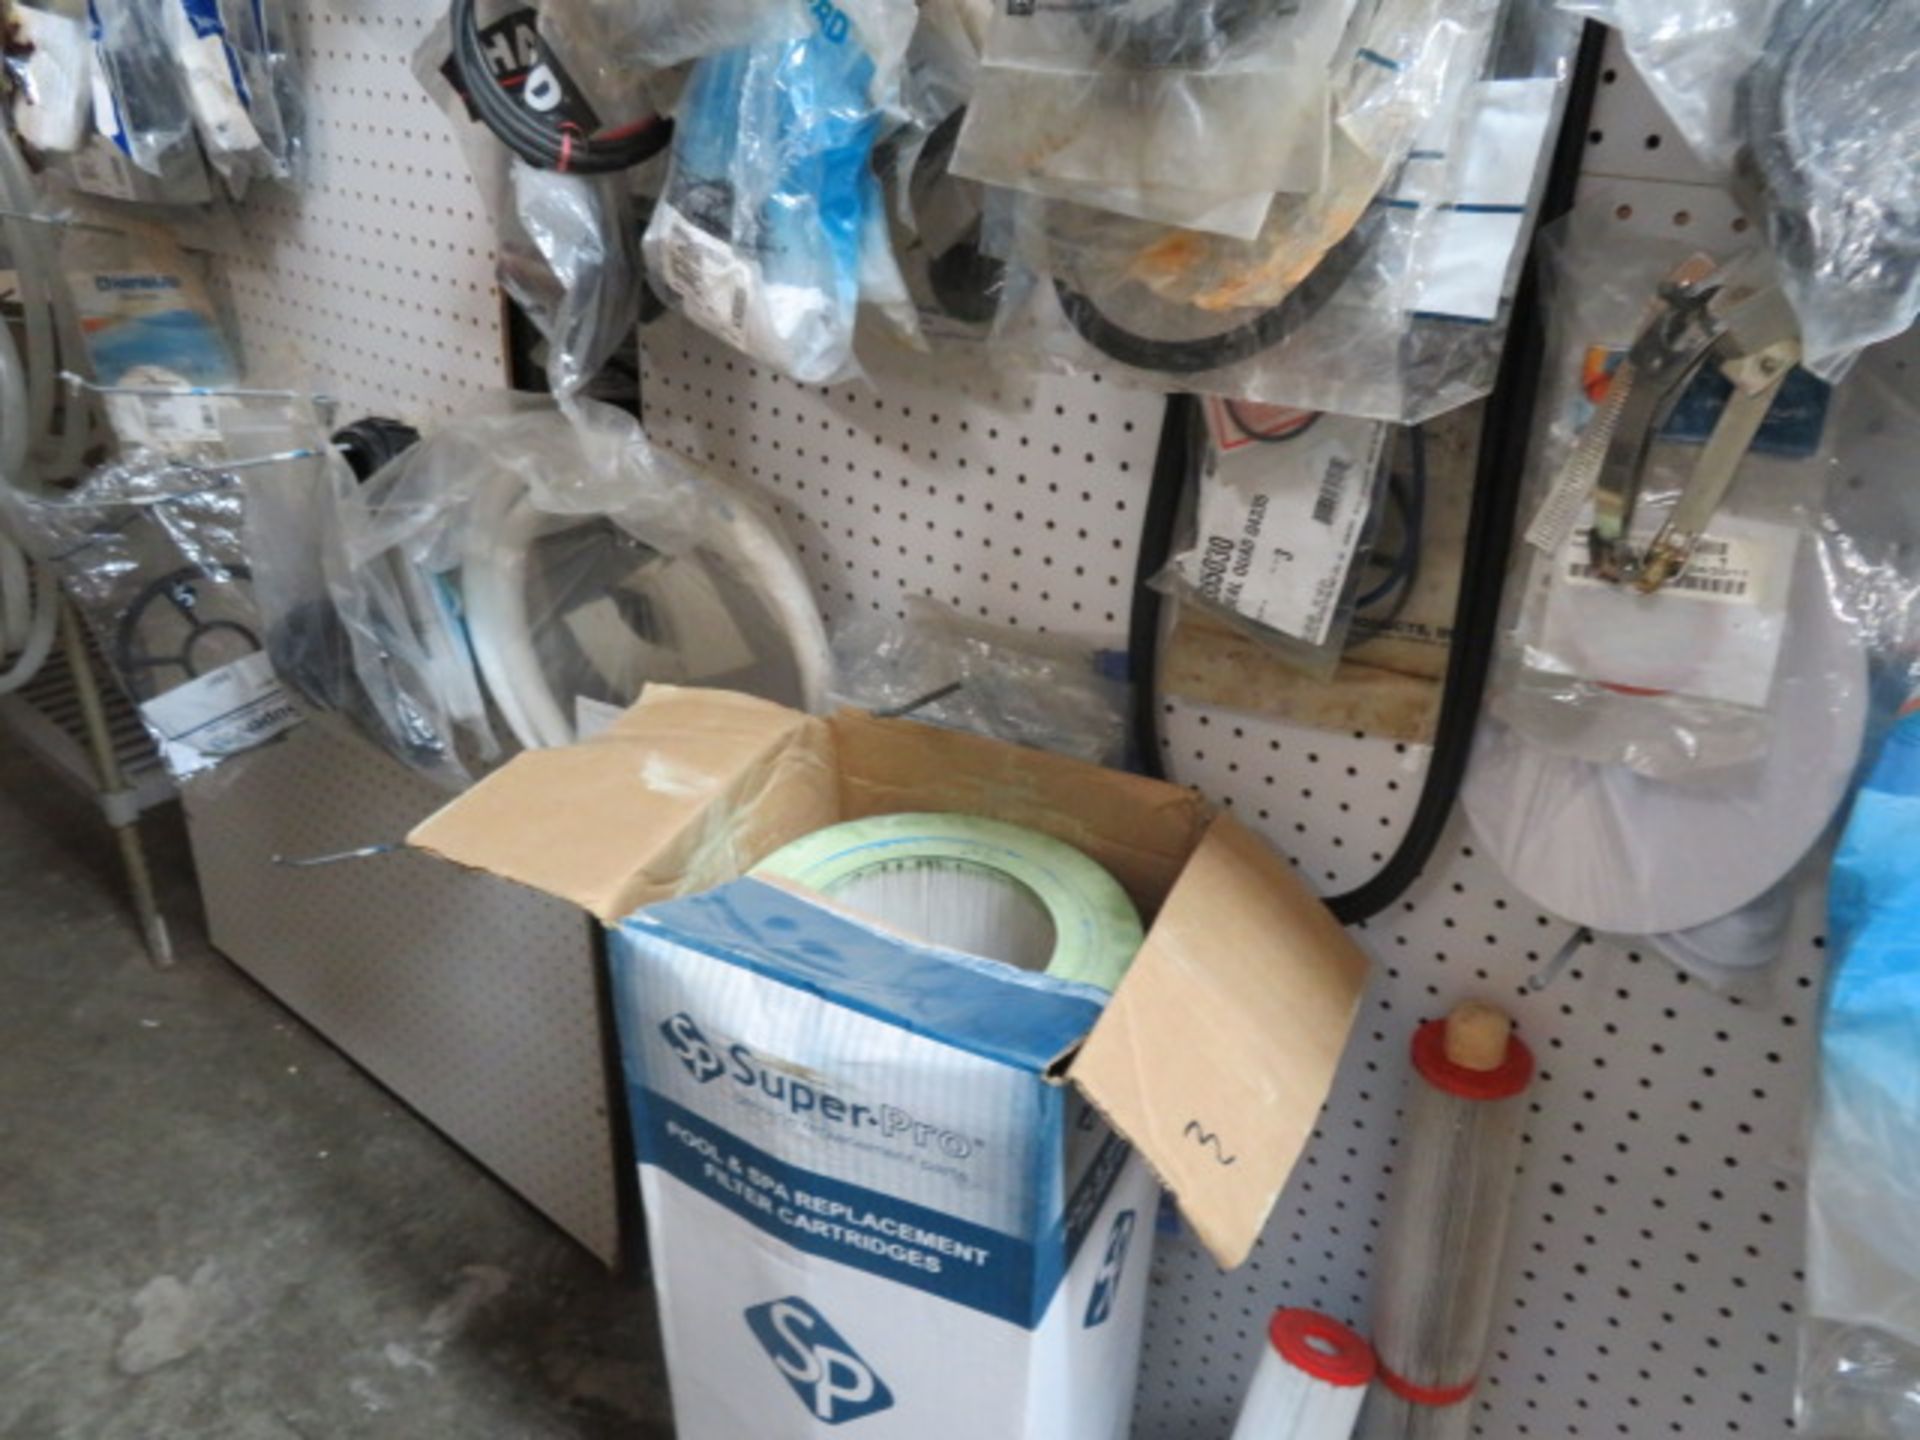 LOT CONSISTING OF: pool sweep, filter parts, pump parts, table chlorinator parts, assorted - Image 10 of 17